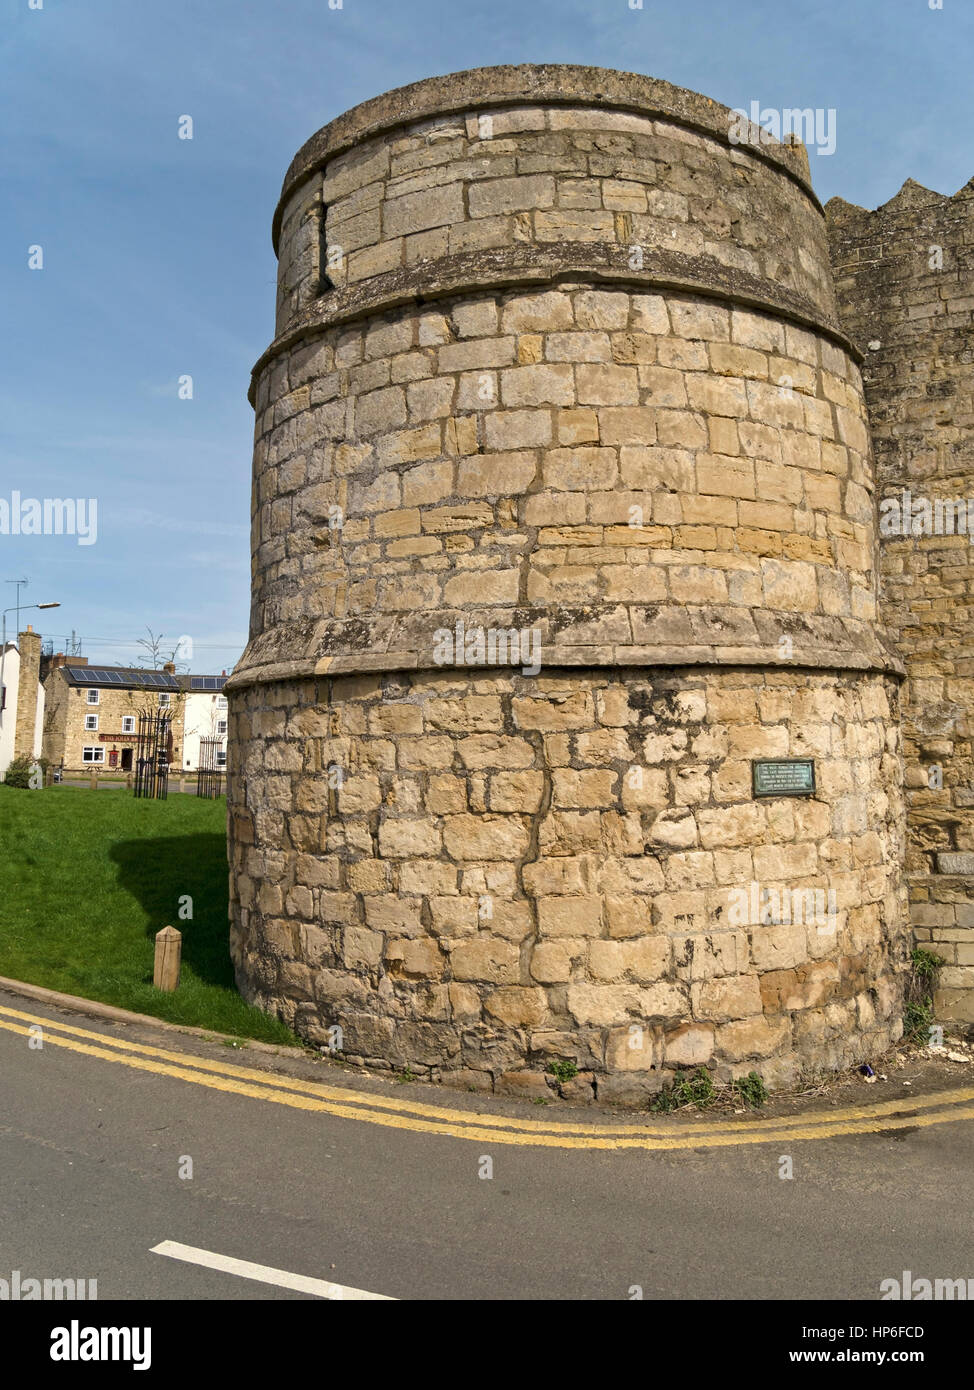 The only remaining stone town wall bastion tower, St Peter's Gate, Stamford, Lincolnshire, England, UK Stock Photo